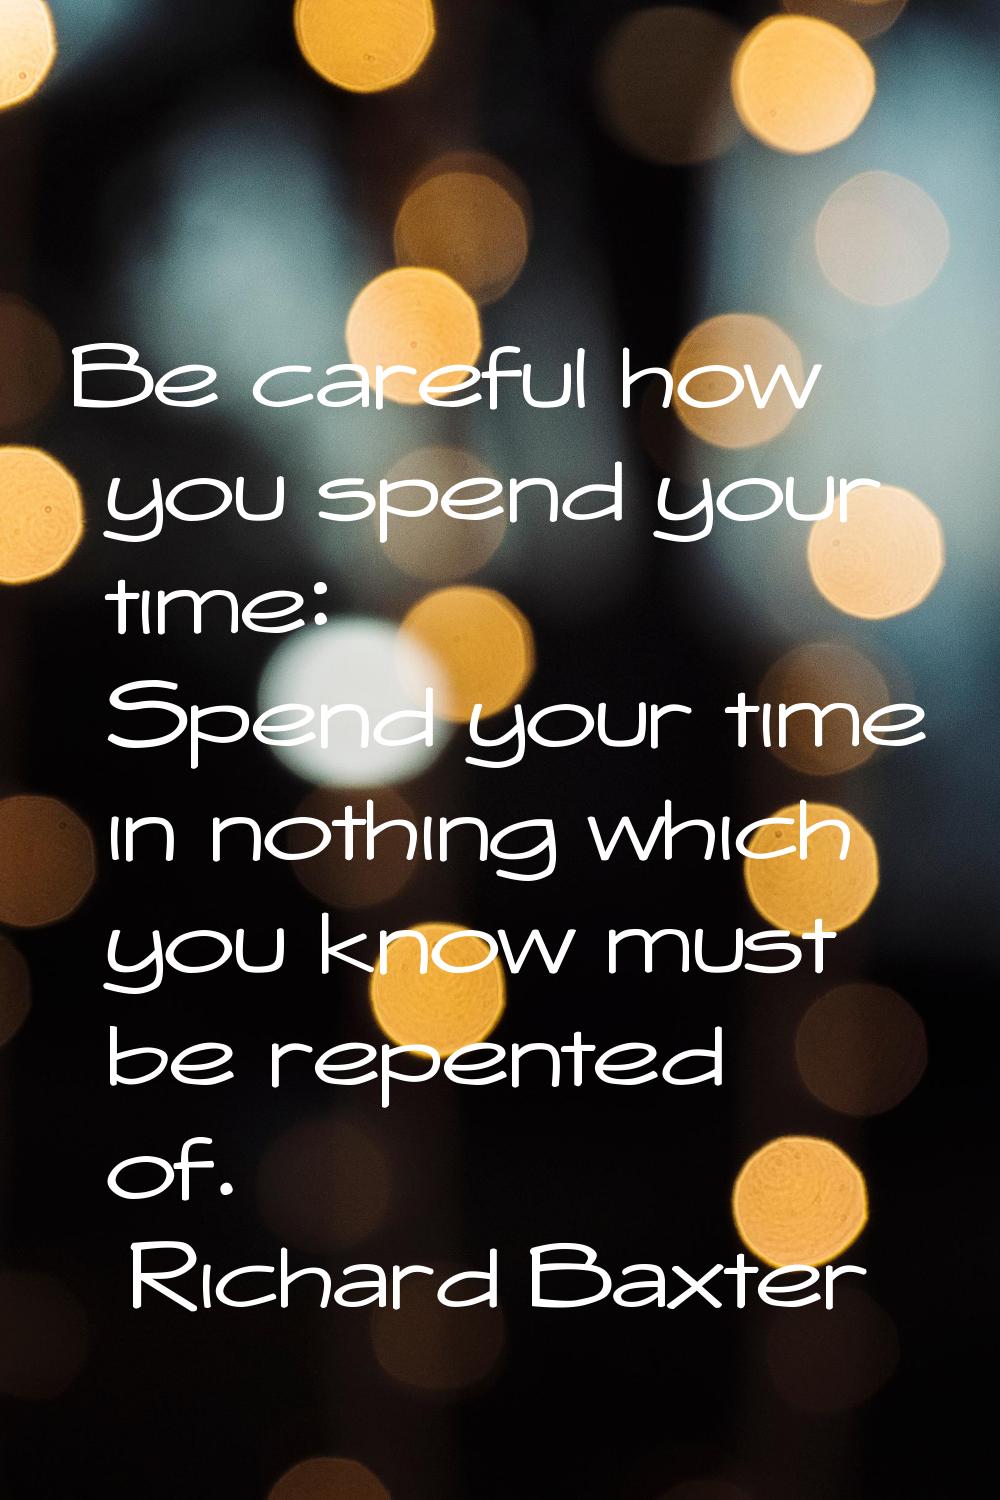 Be careful how you spend your time: Spend your time in nothing which you know must be repented of.